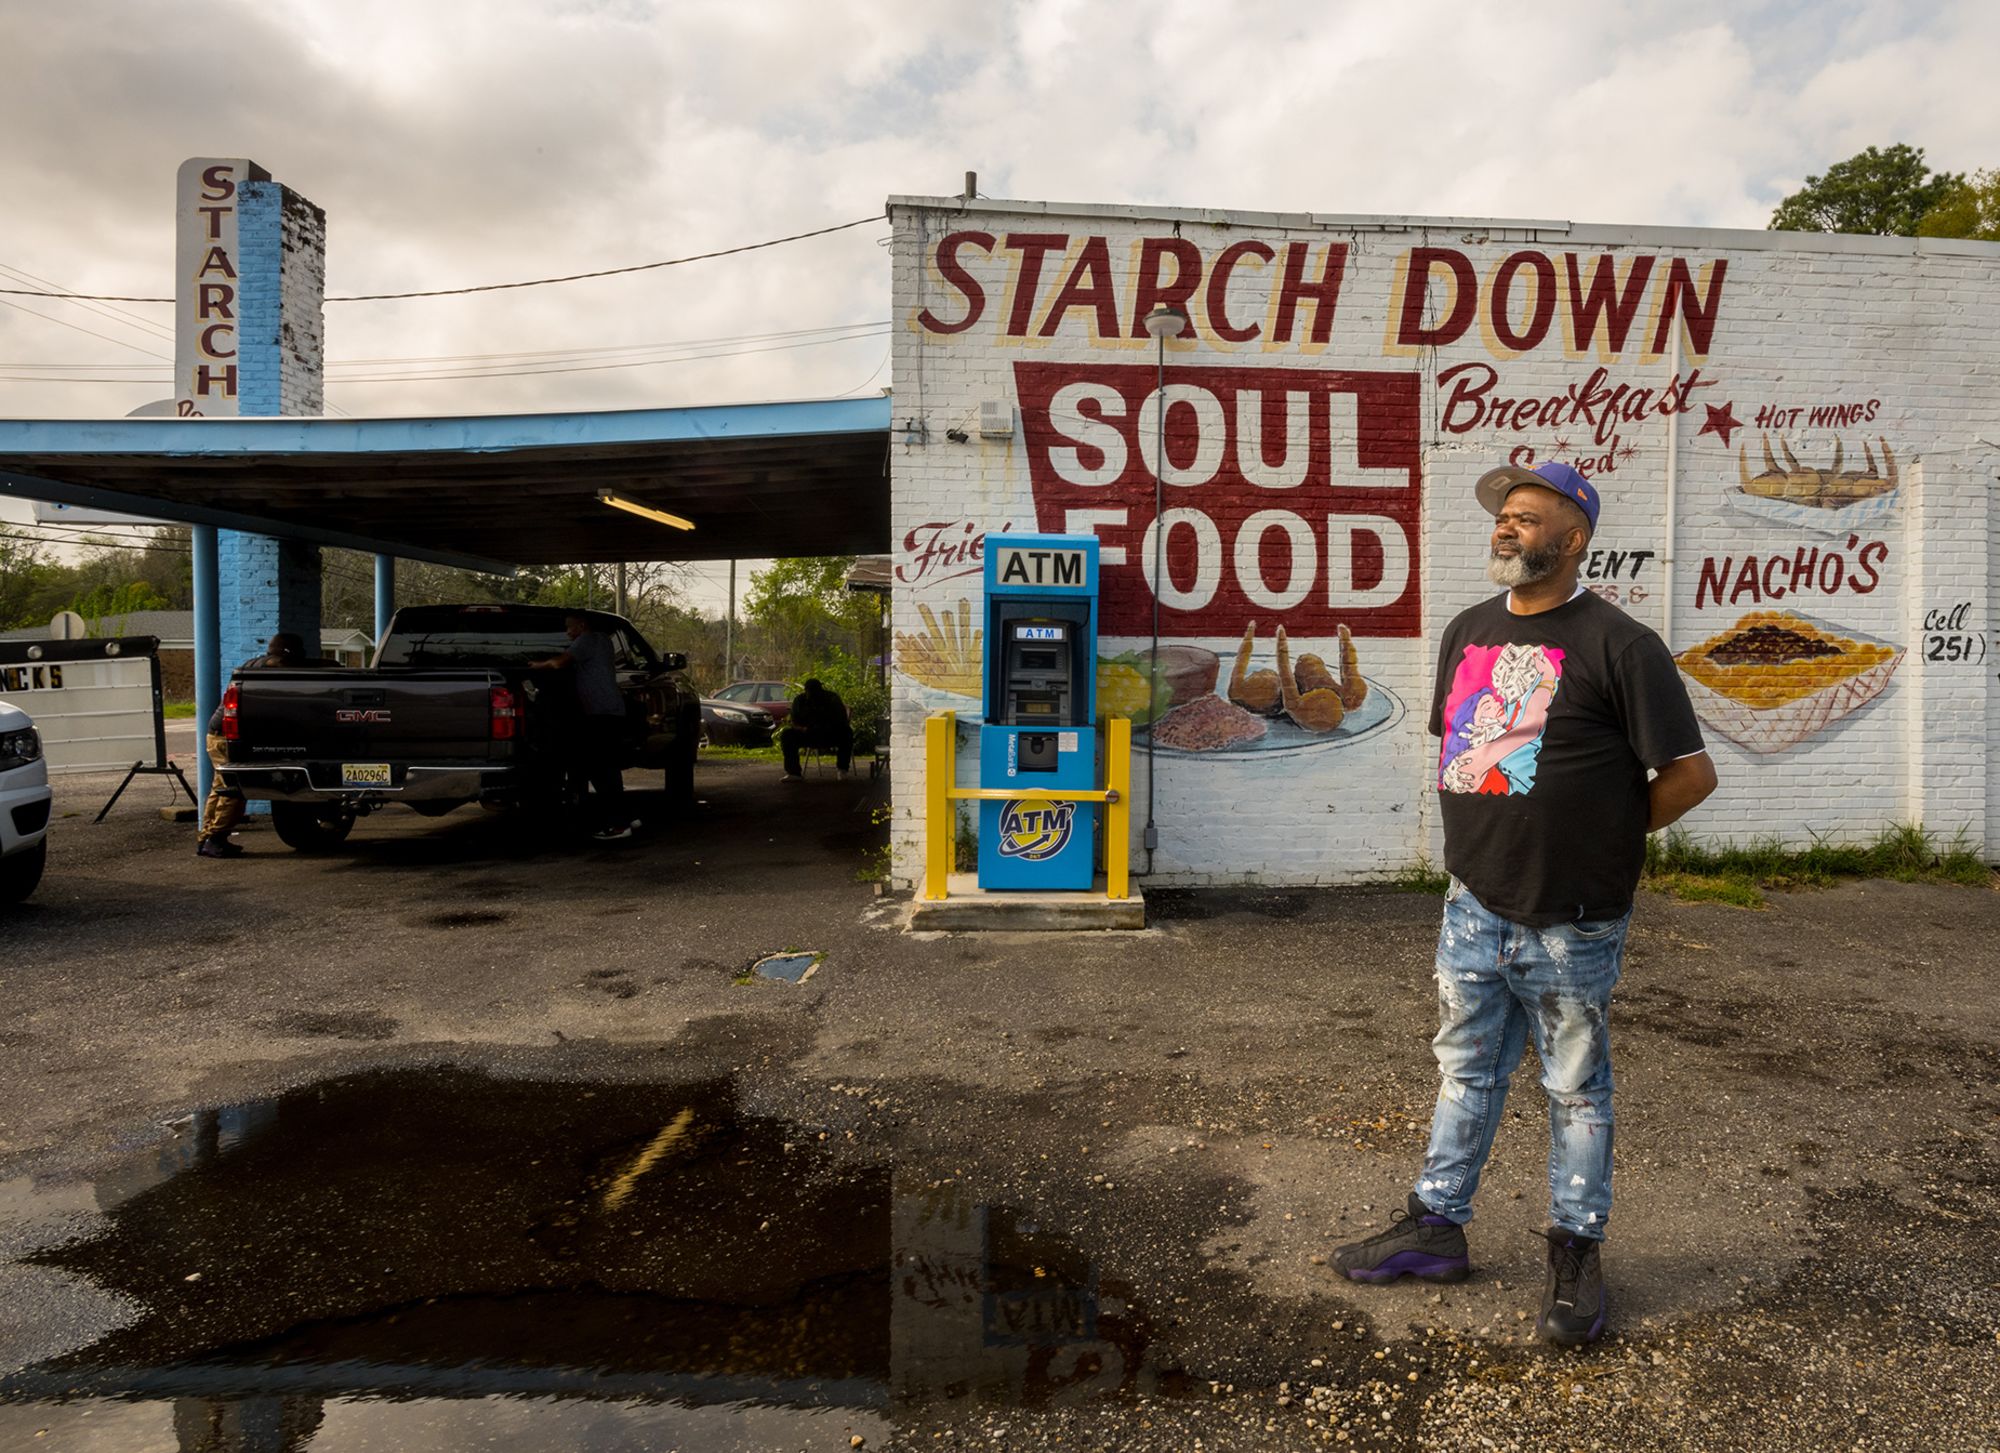 Big White, a cook at Starch Down in Prichard, Alabama. The soul food quick stop which was previously a dry cleaning business of the same name.